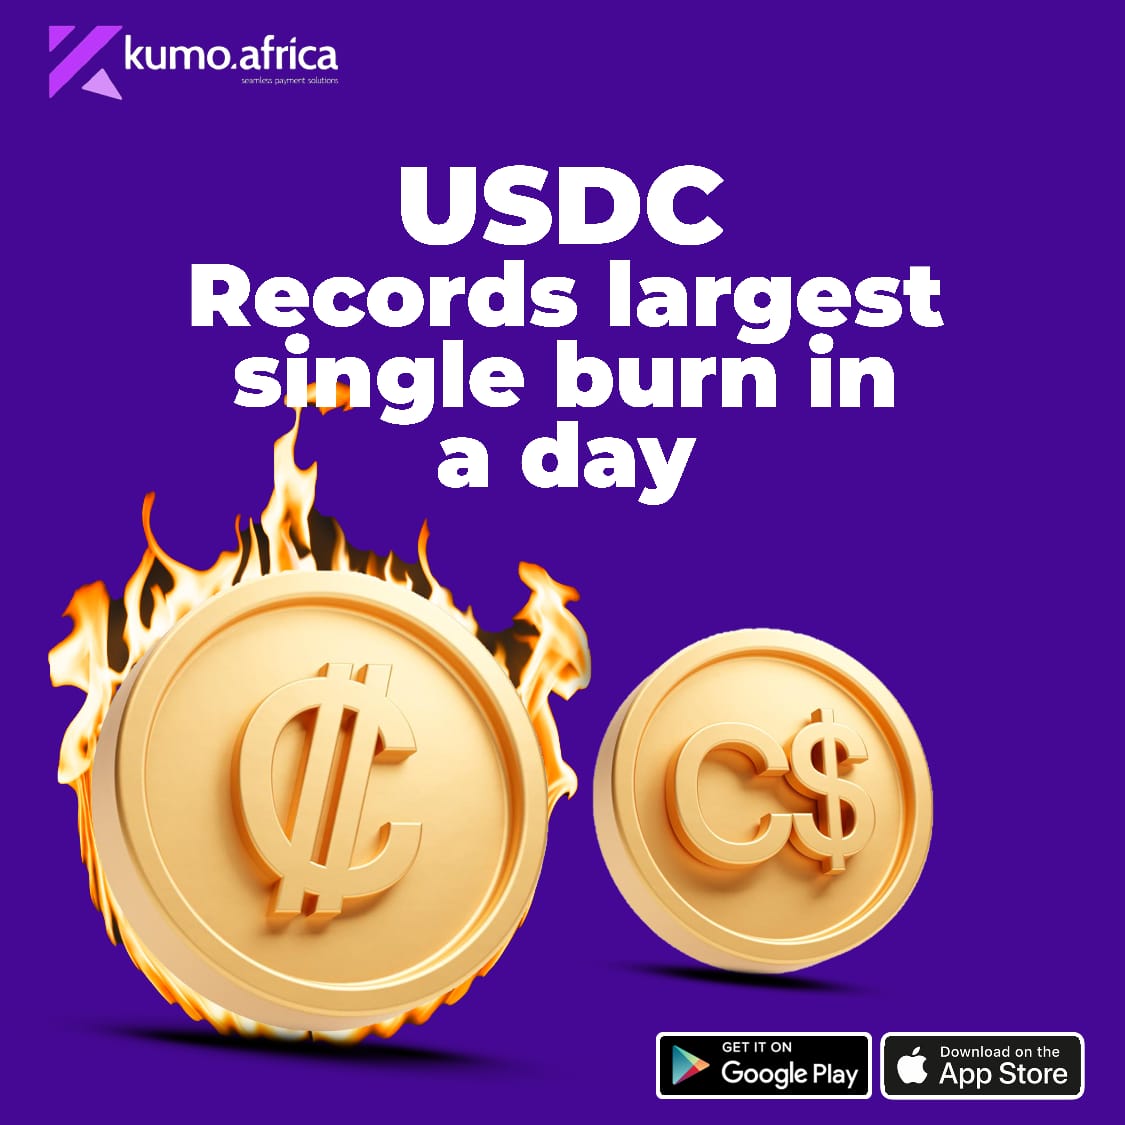 USDC largest single burn in a day